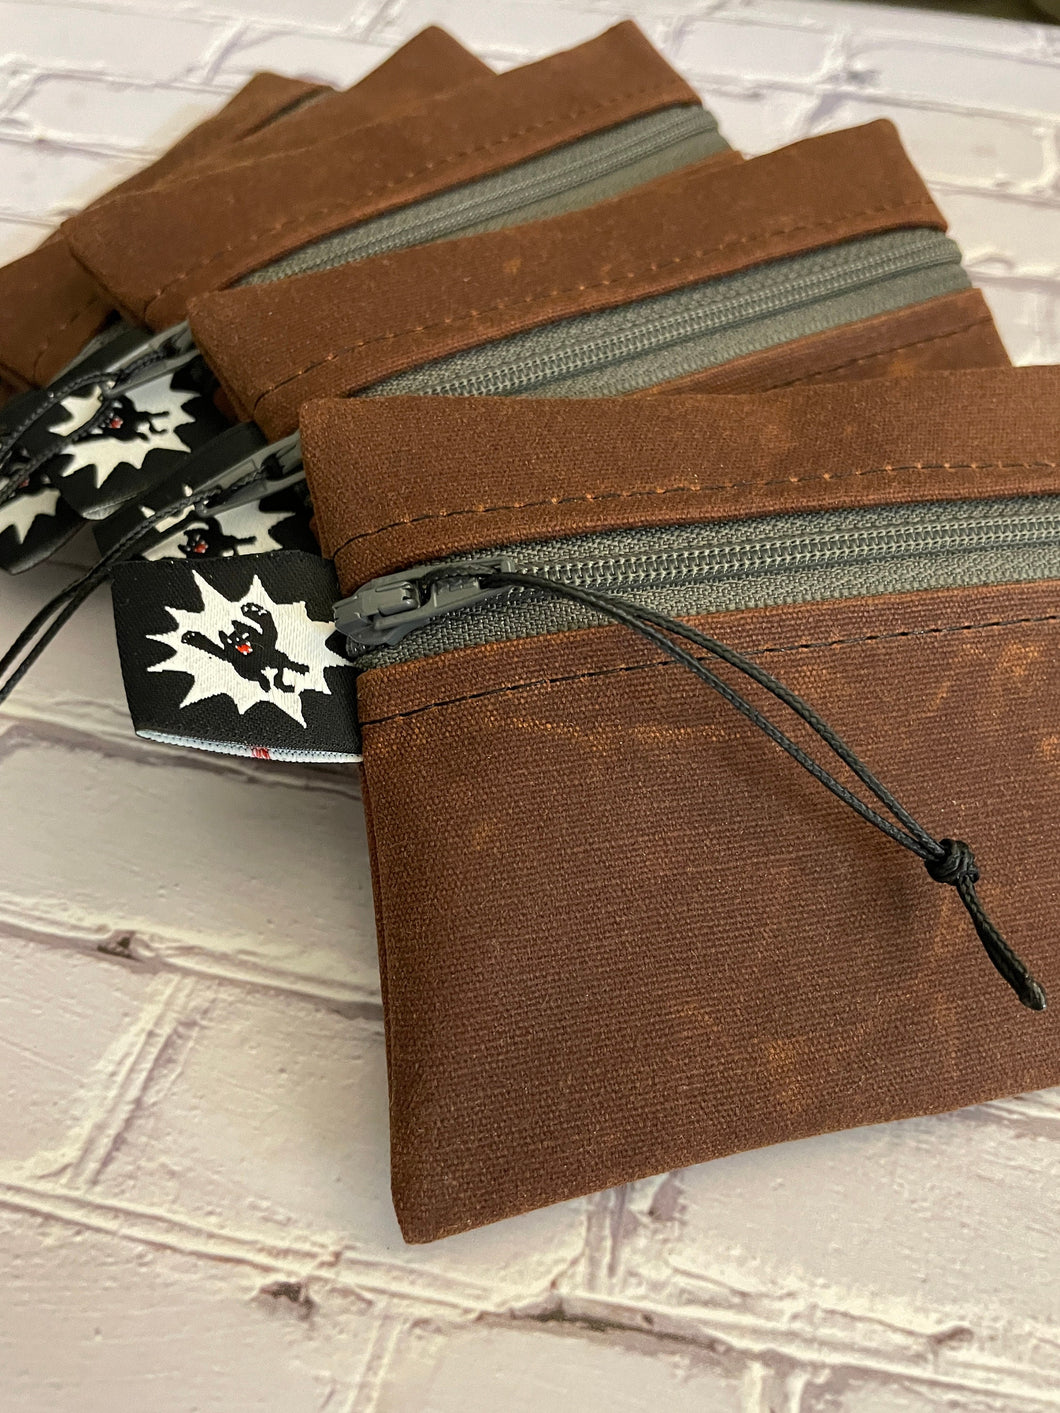 Waxed Canvas EDC Pouch | Mini Pouch | Small Zipper Wallet | Everyday Carry Bag | Hook and Loop Pouch | EDC Gear | Pecan Brown